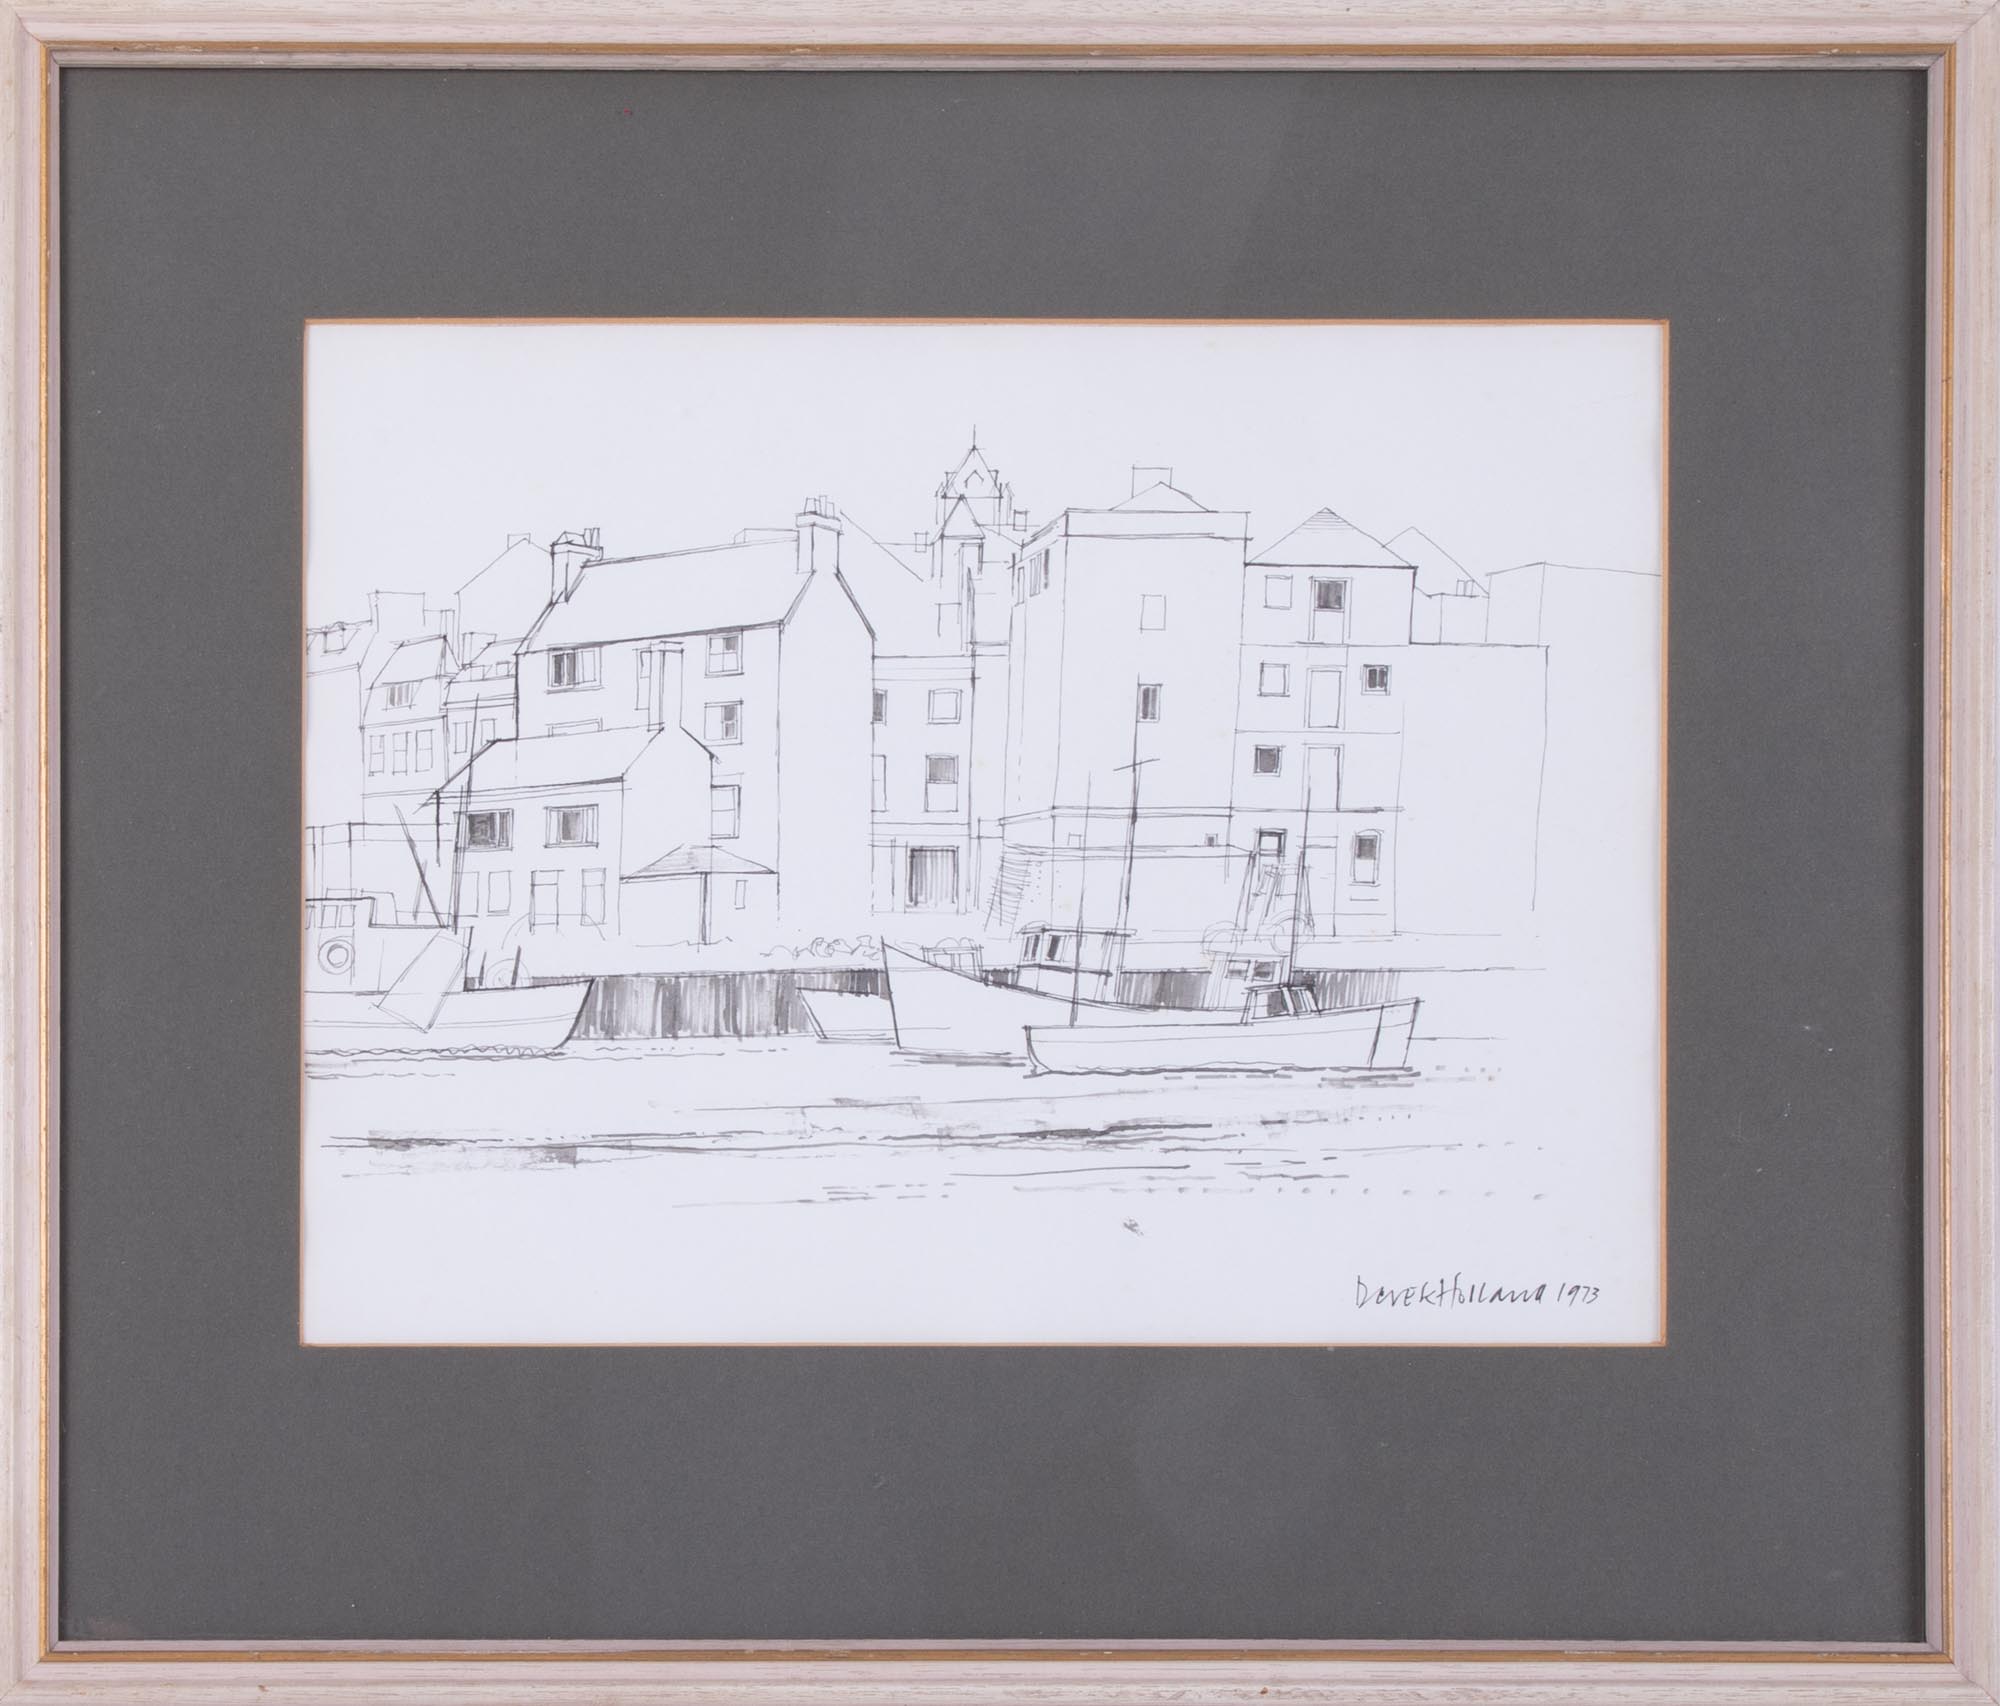 Derek Holland, 'Fishing boats tied up at the Barbican' pen drawing, signed and dated 1973, 24cm x